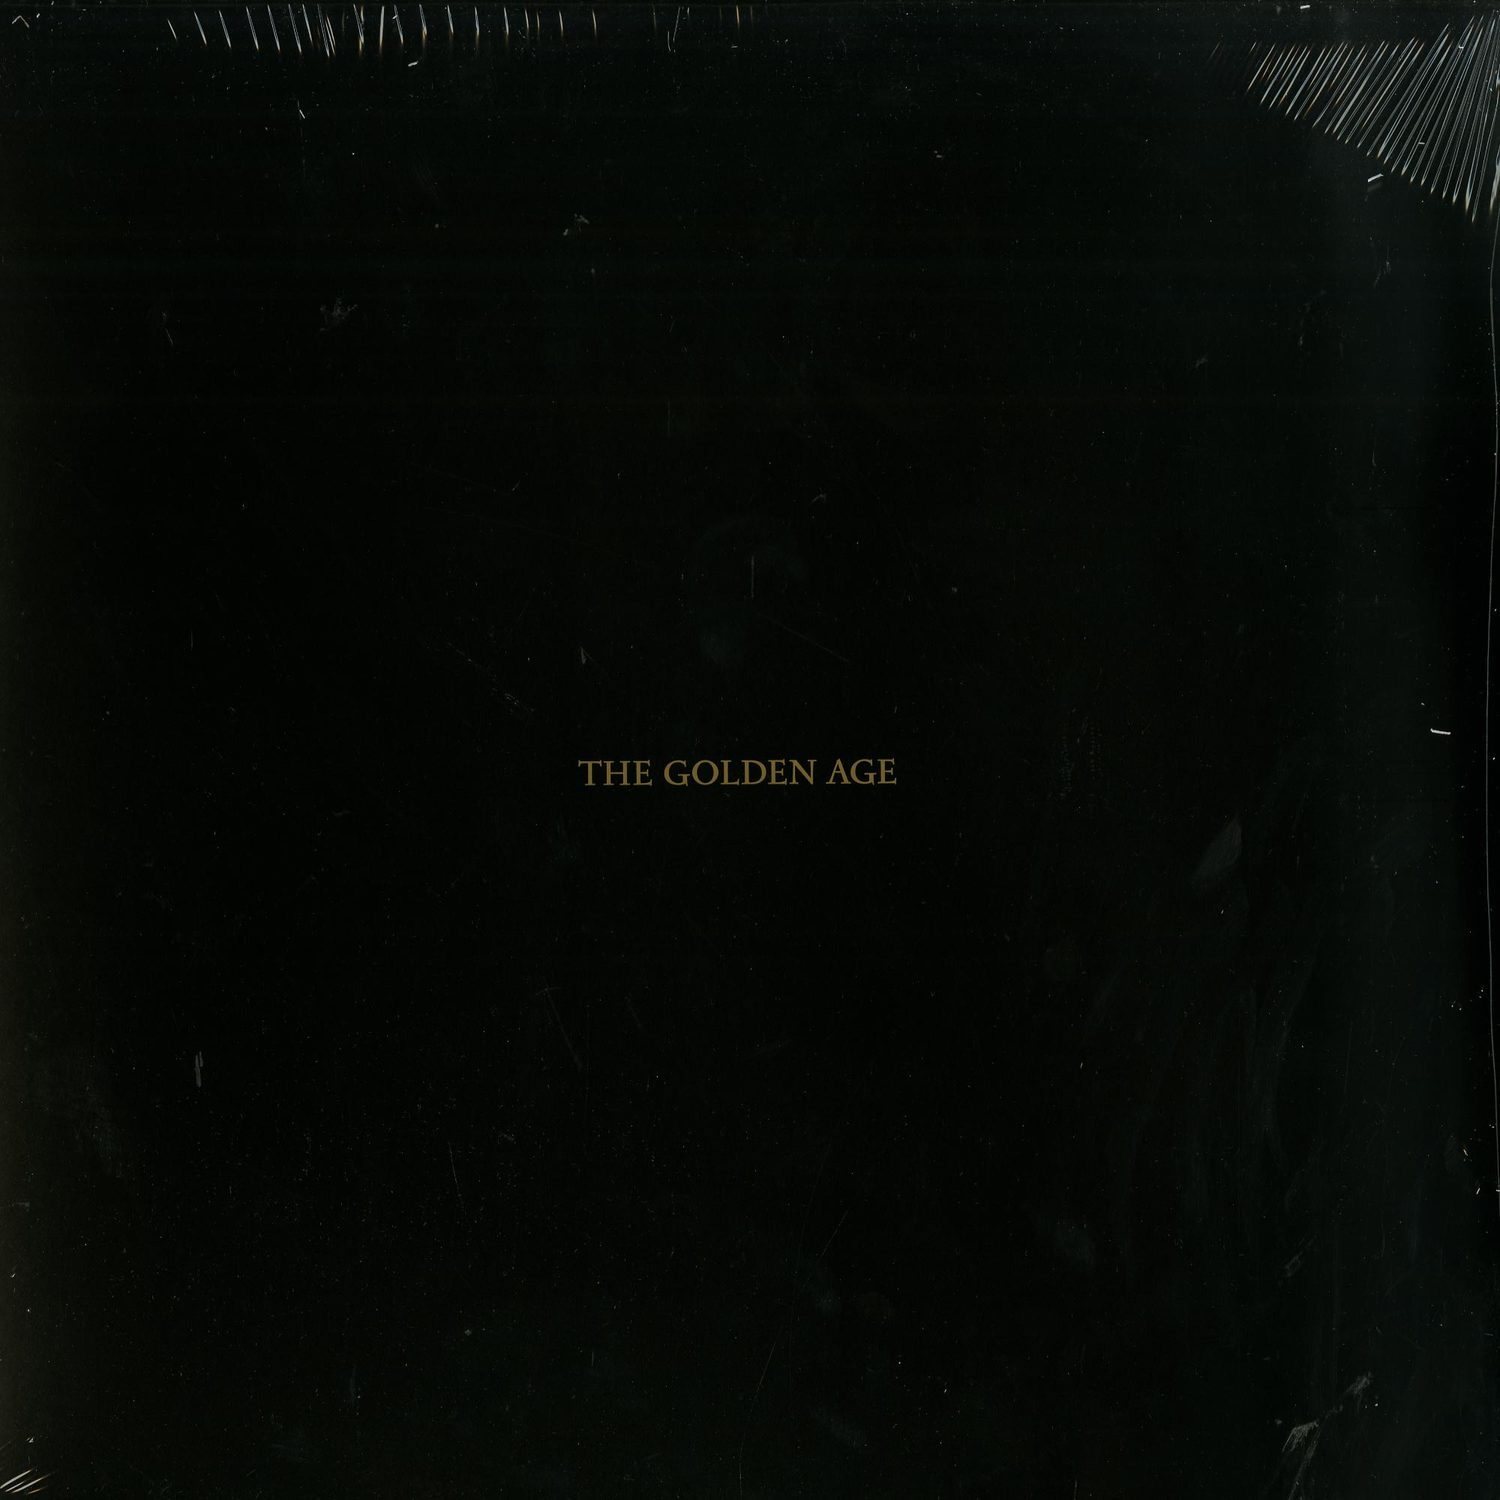 Ottodox - THE LOVE OF A FORMER GOLDEN AGE PT. I: THE GOLDEN AGE 